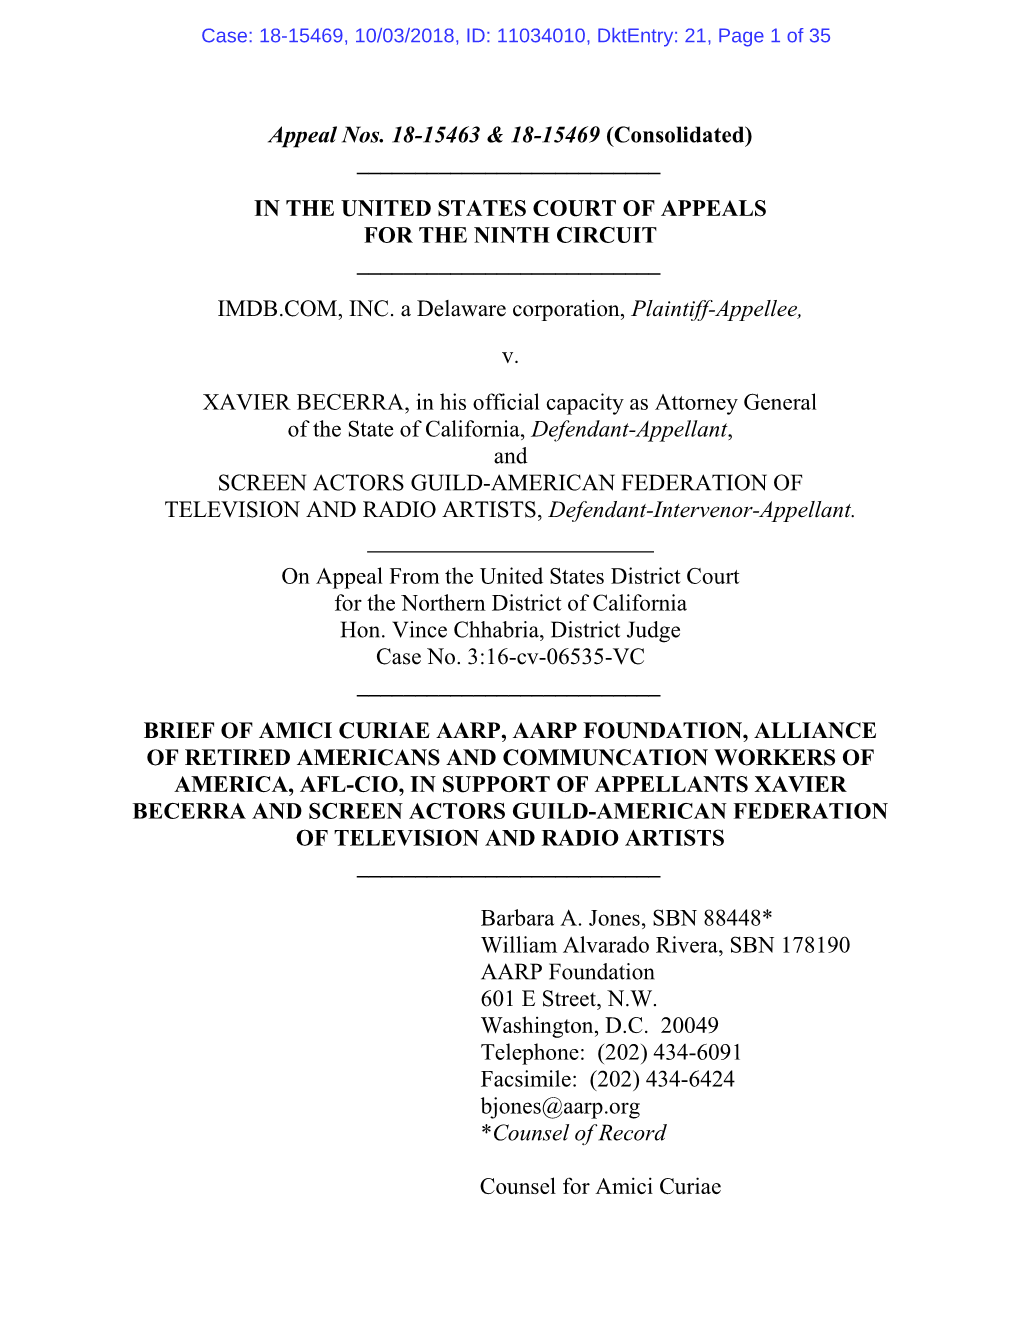 Amicus Briefs to Address Employment Practices and Other Conduct That Threaten the Financial Security and Well-Being of Older Americans